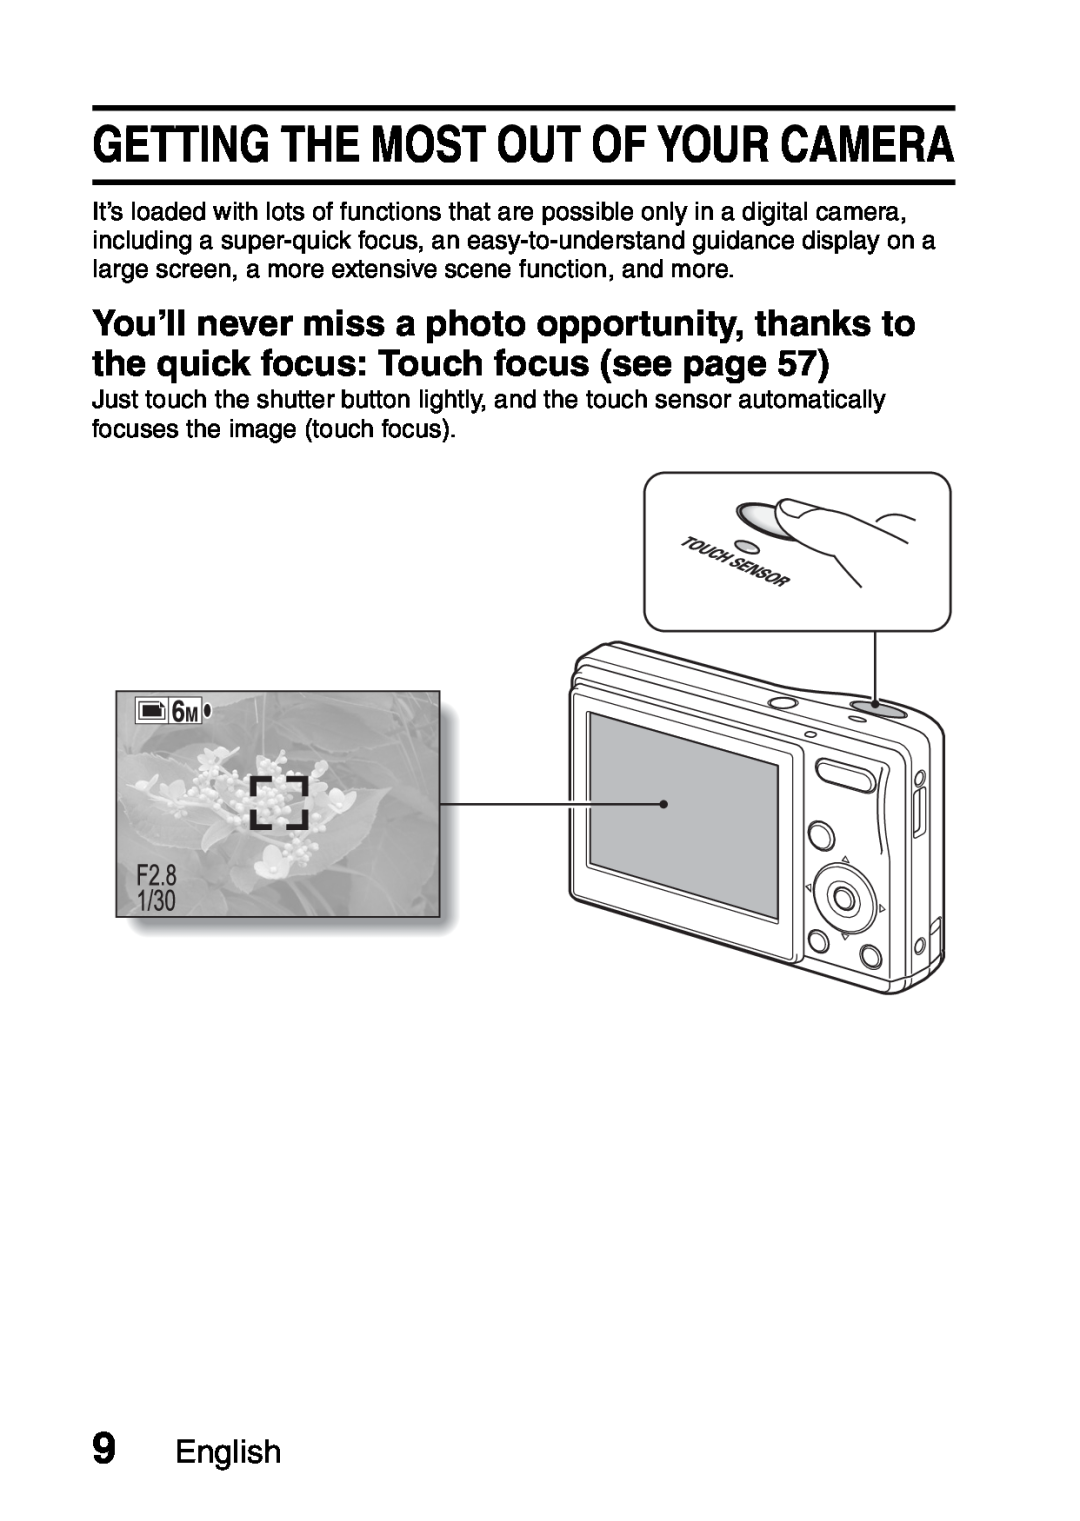 Sanyo VPC-S60 instruction manual Getting The Most Out Of Your Camera, English 